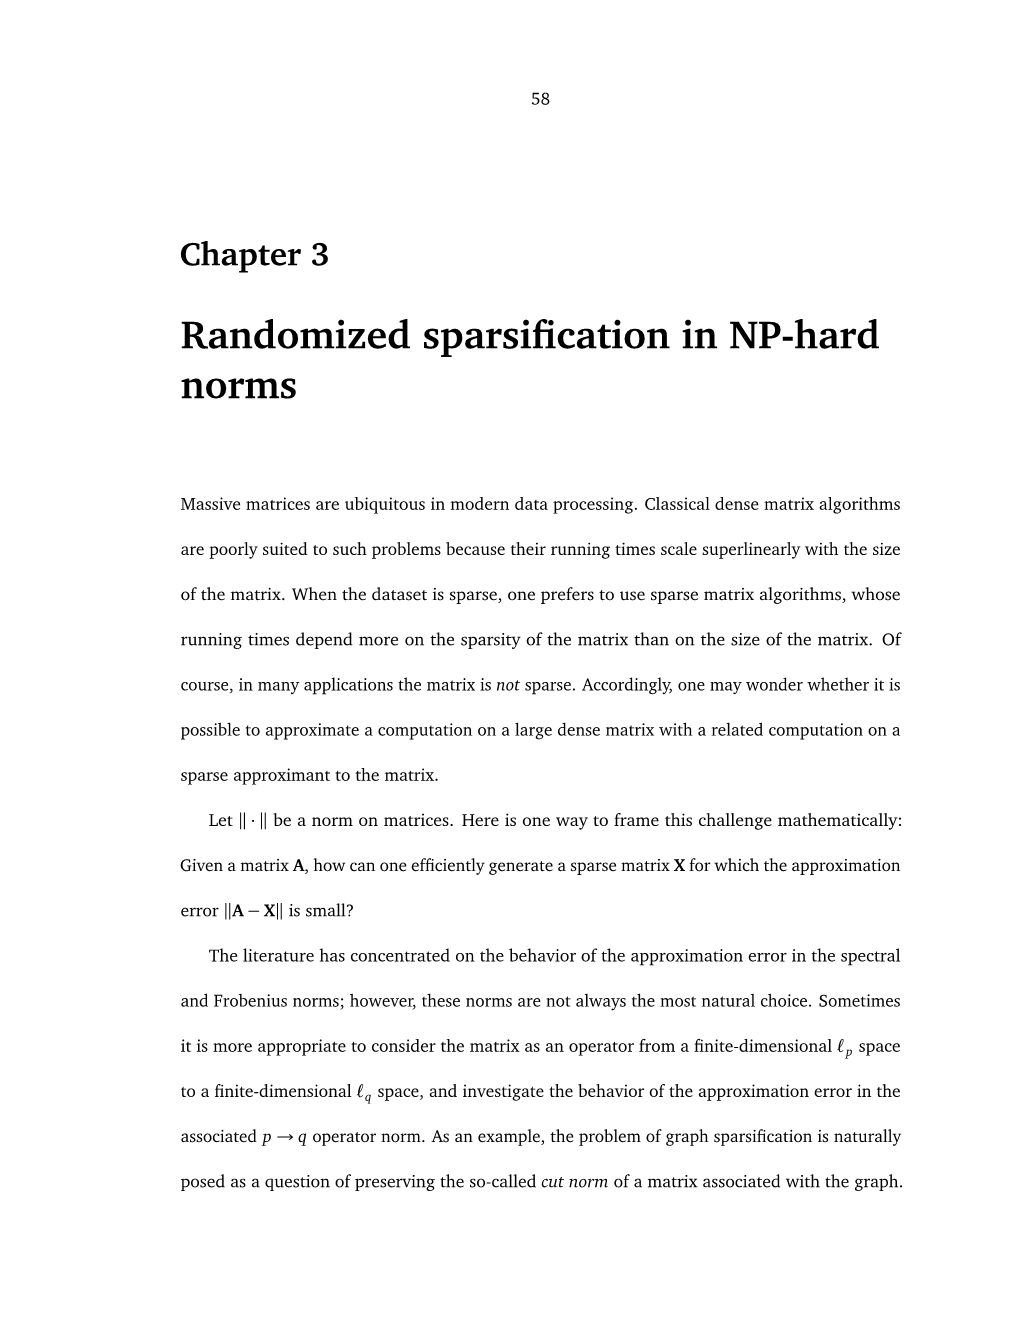 Randomized Sparsification in NP-Hard Norms